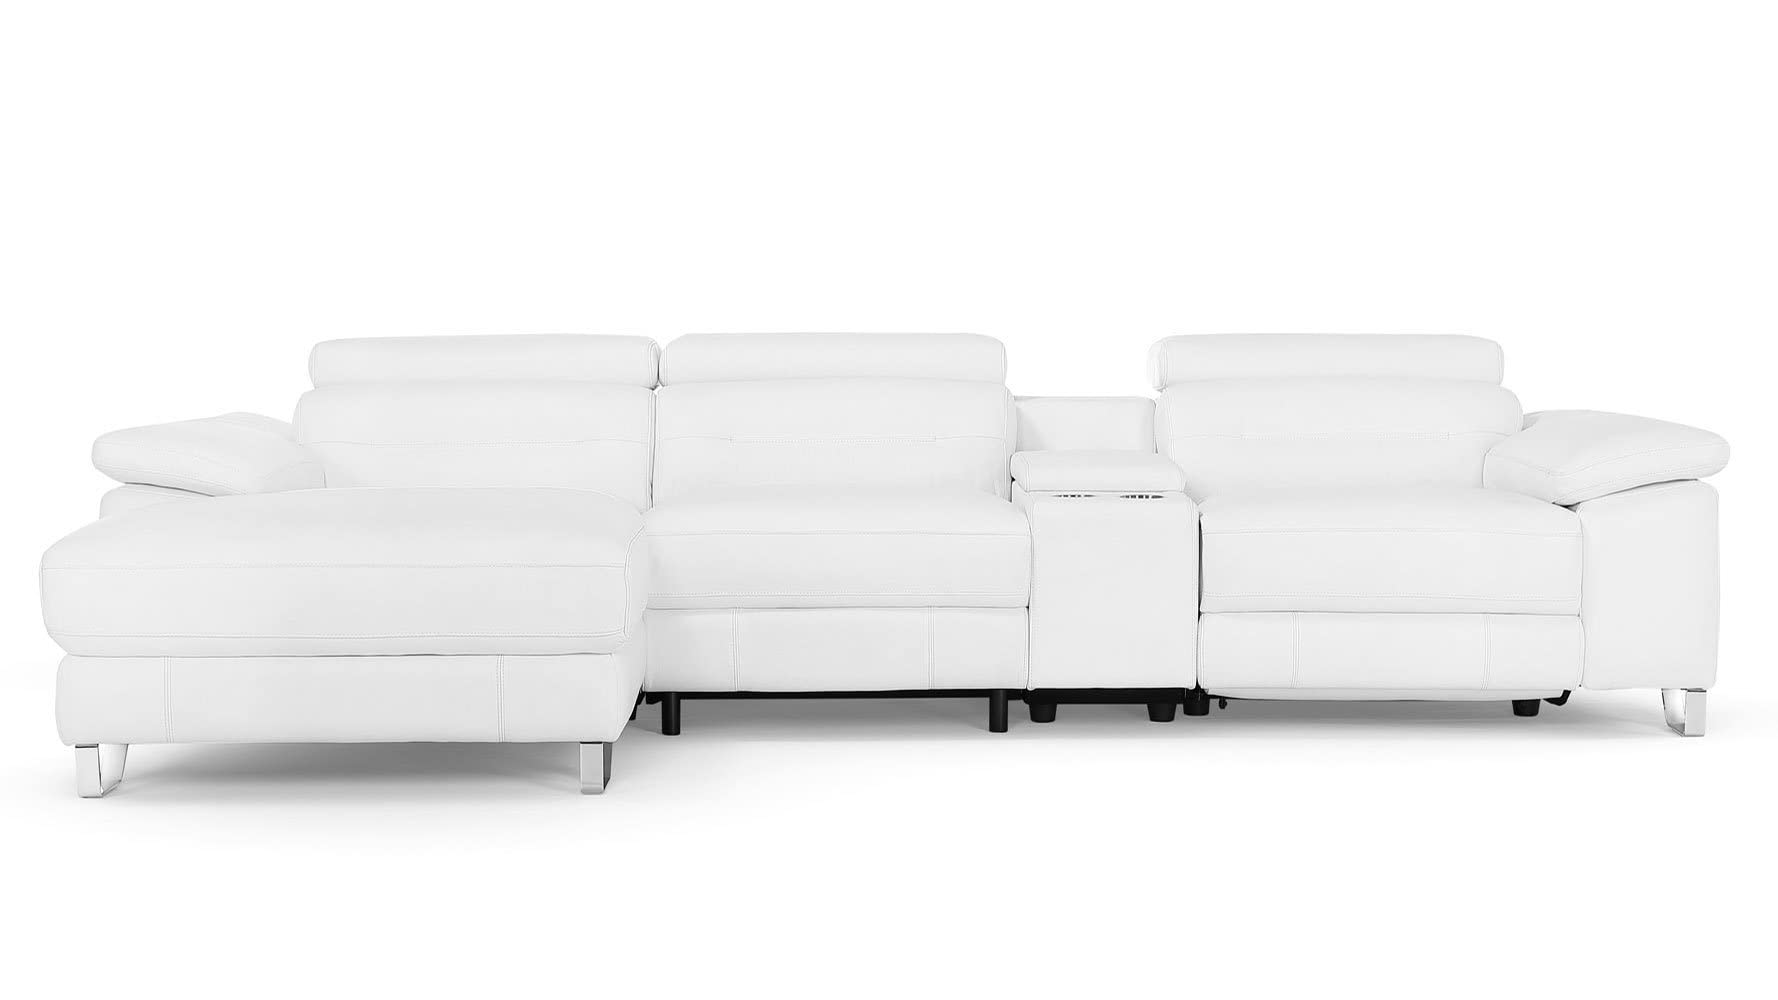 Zuri Furniture Monaco Reclining Leather L-Sectional with Console, White